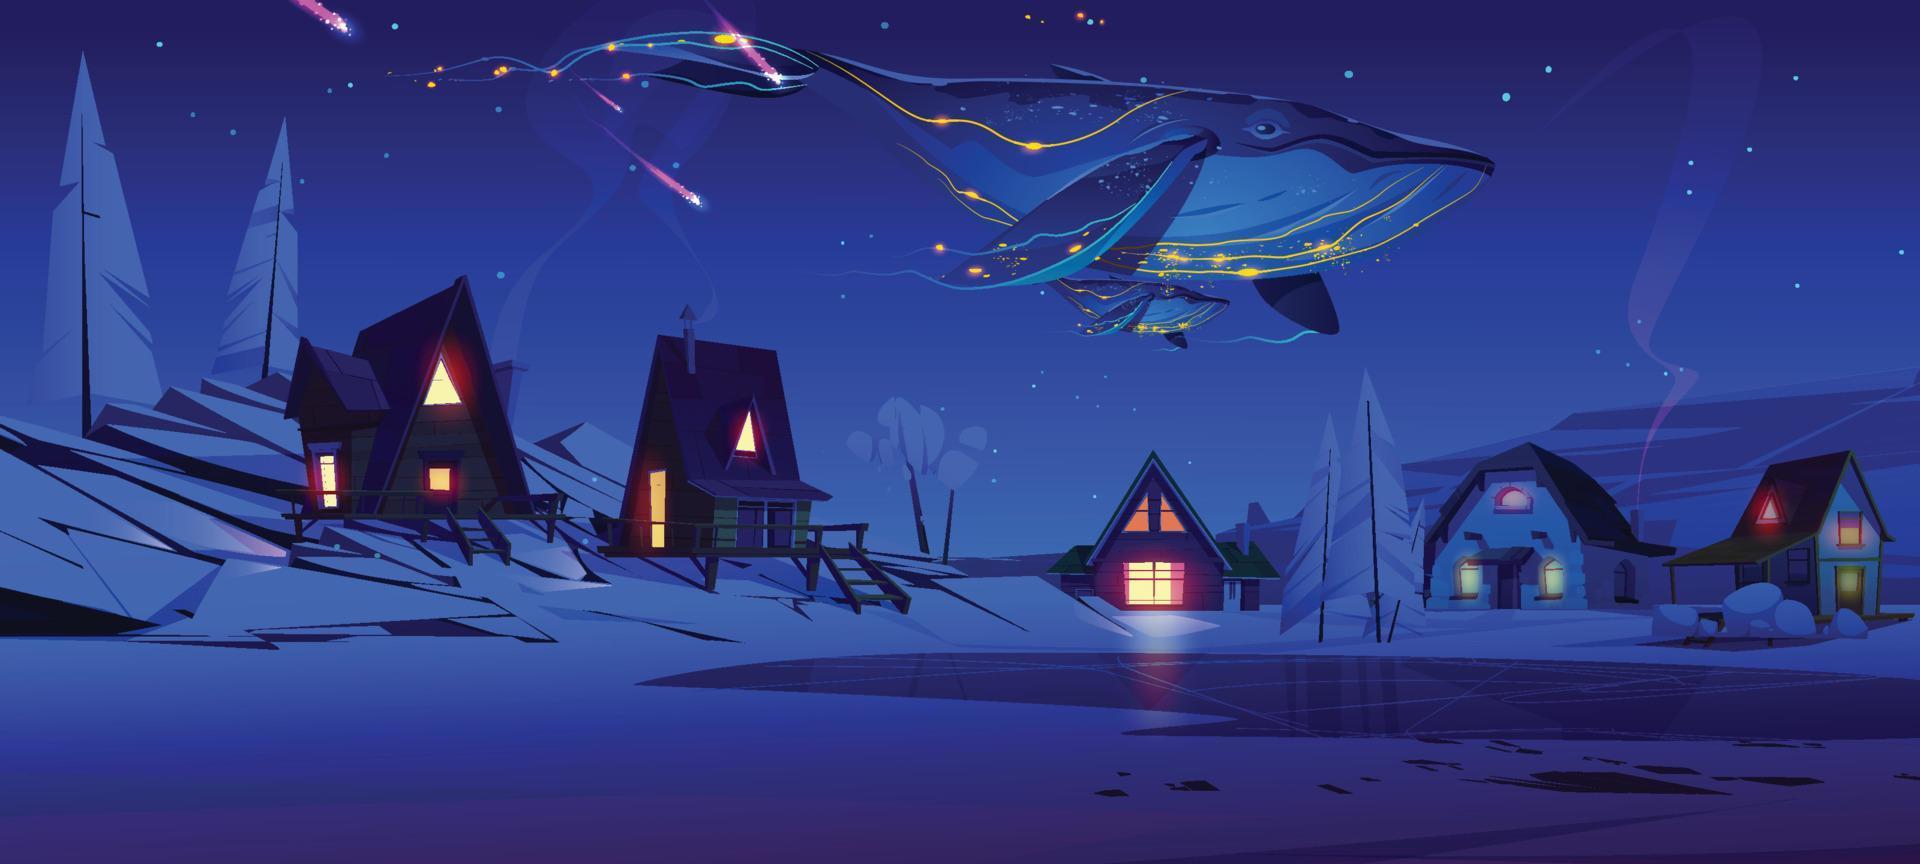 space whales flying over a town in snowy north valley fantasy illustration art vector